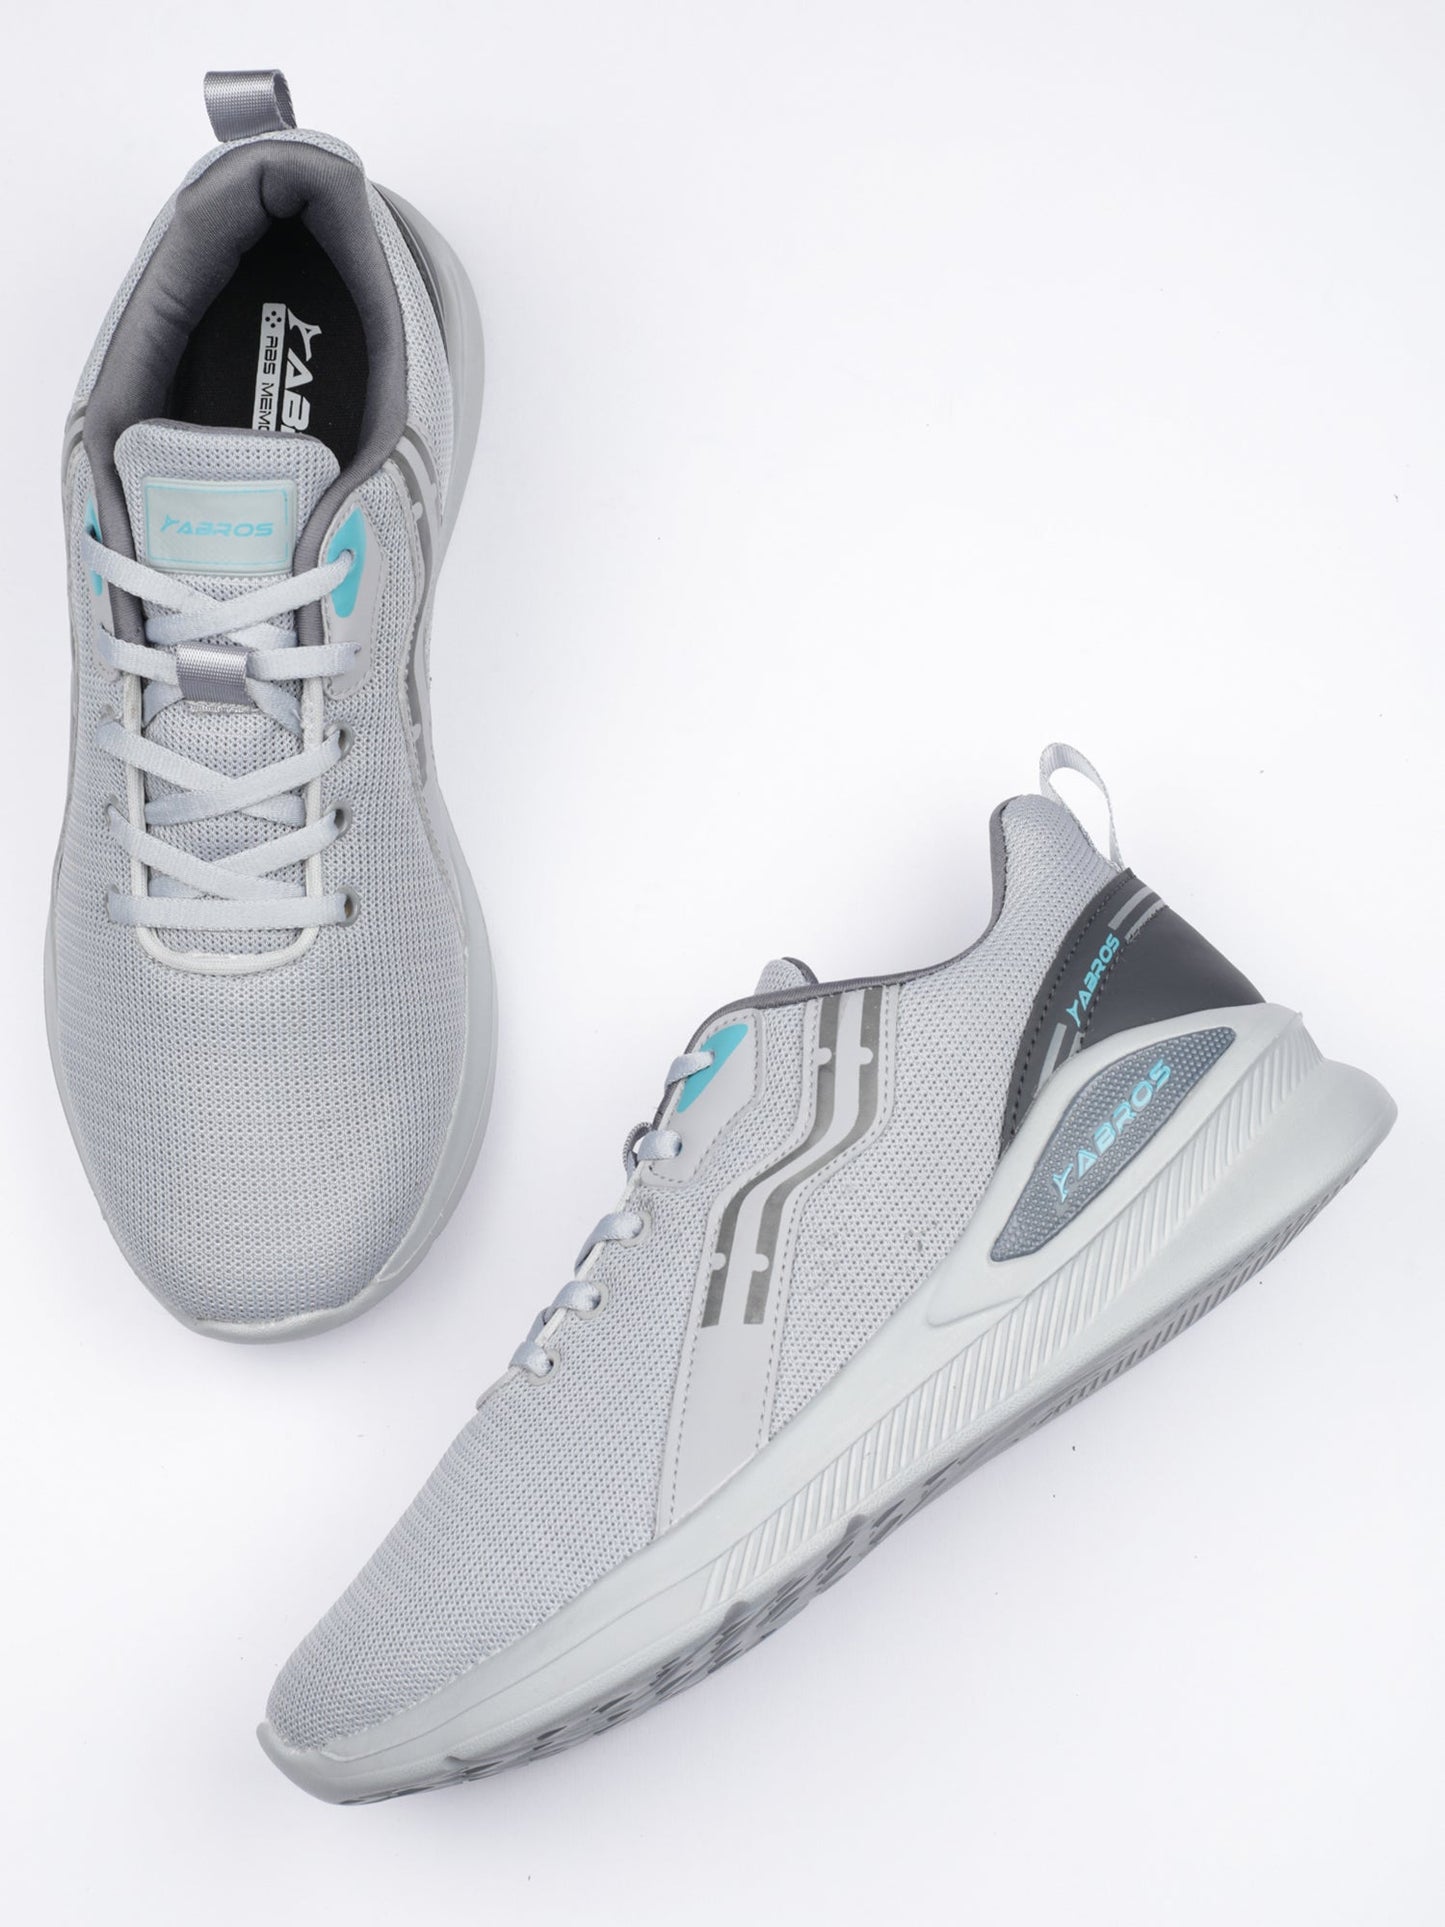 ABROS  TILE RUNNING SPORTS SHOES FOR MEN